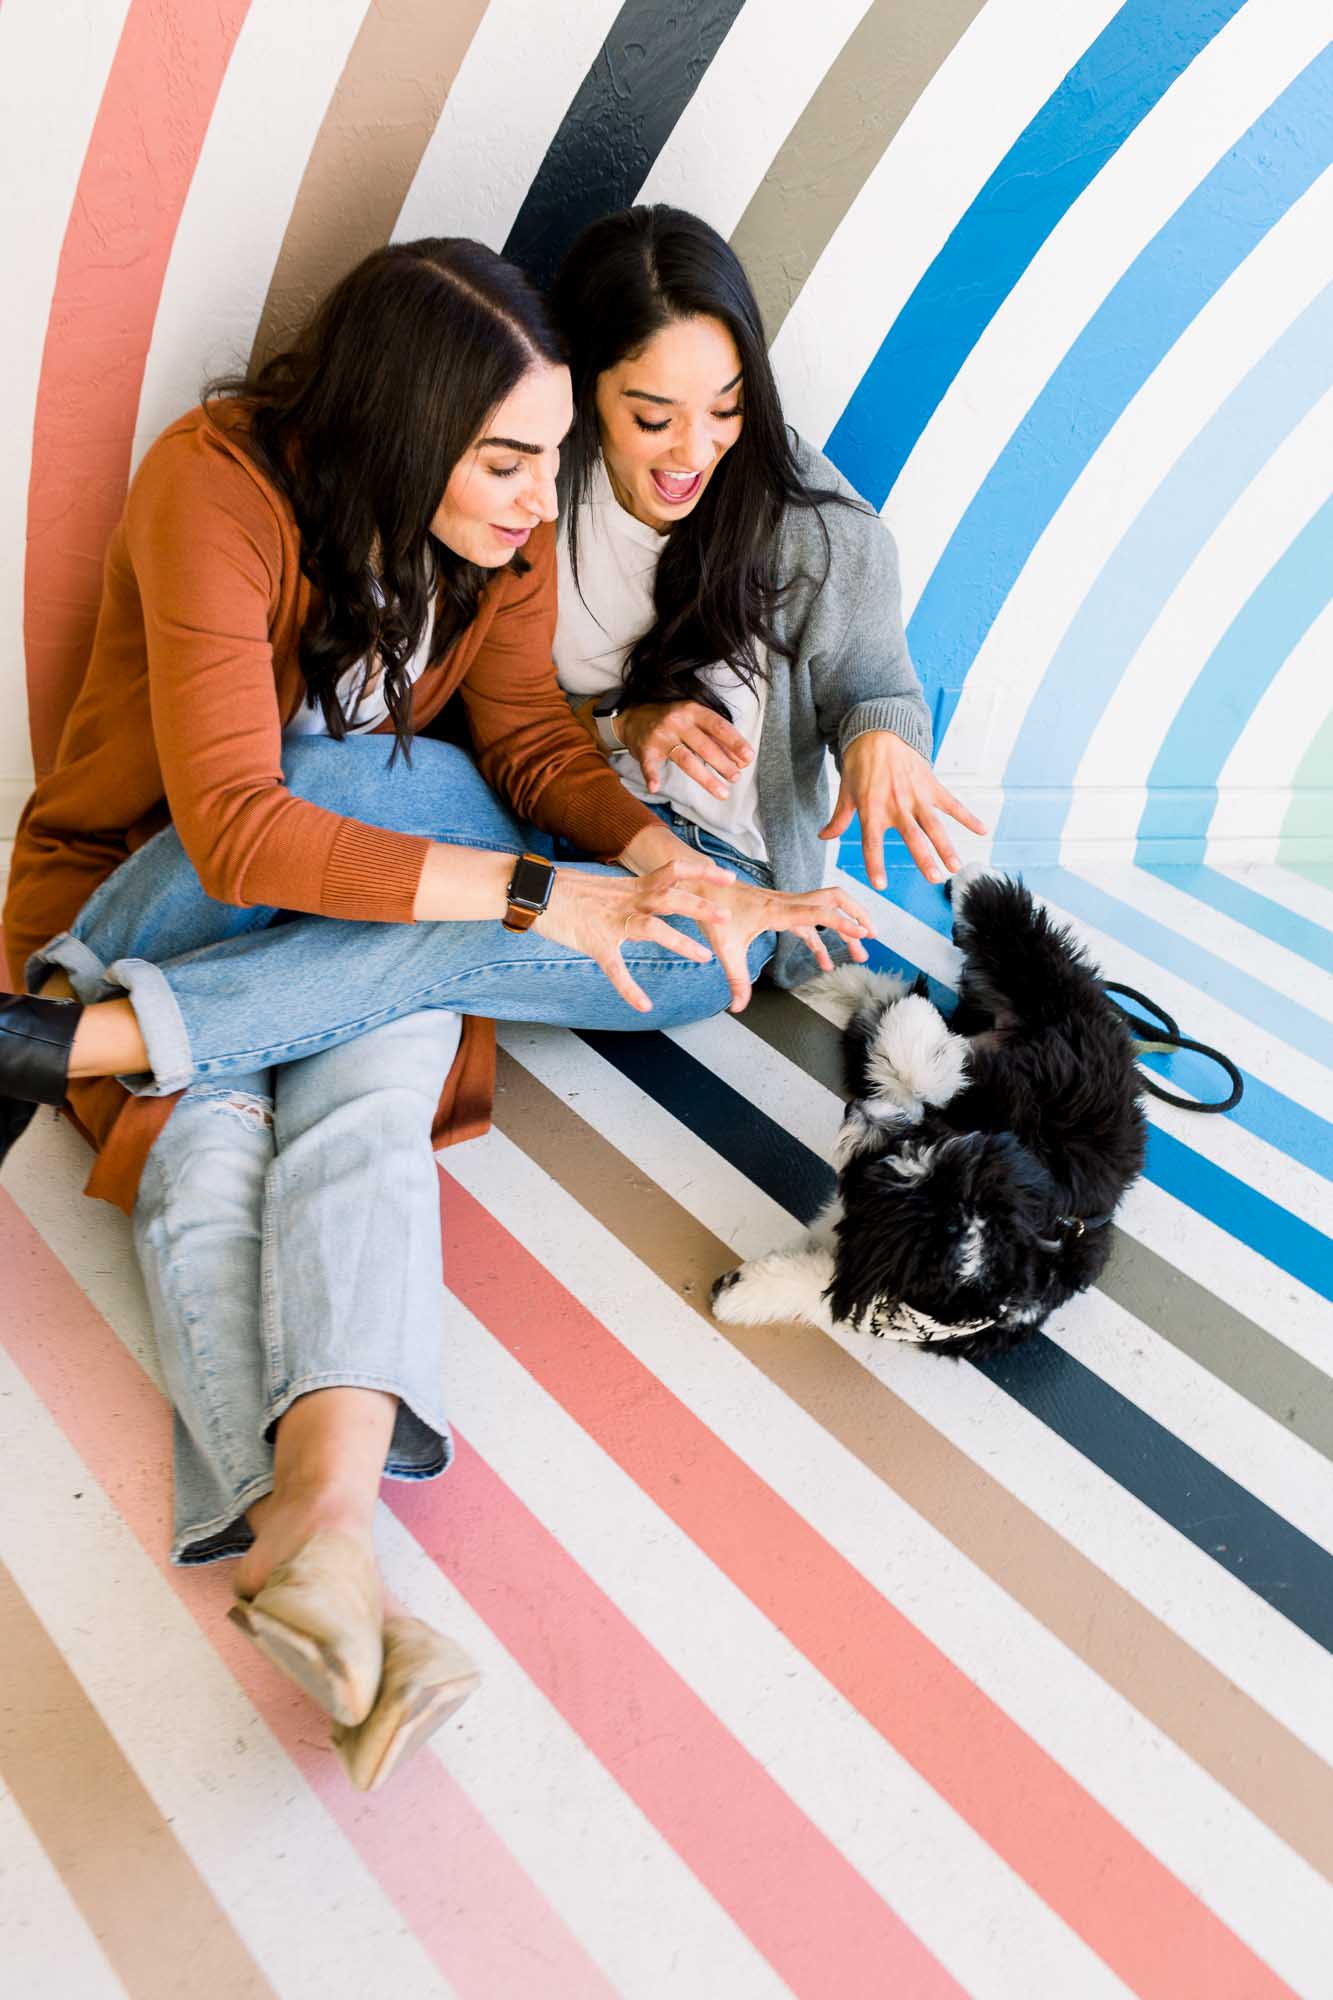 Just because plant shop photo session with rainbow wall celebrates love and a new puppy | Paige Brittany Photography | Featured on Equally Wed, the leading LGBTQ+ wedding magazine